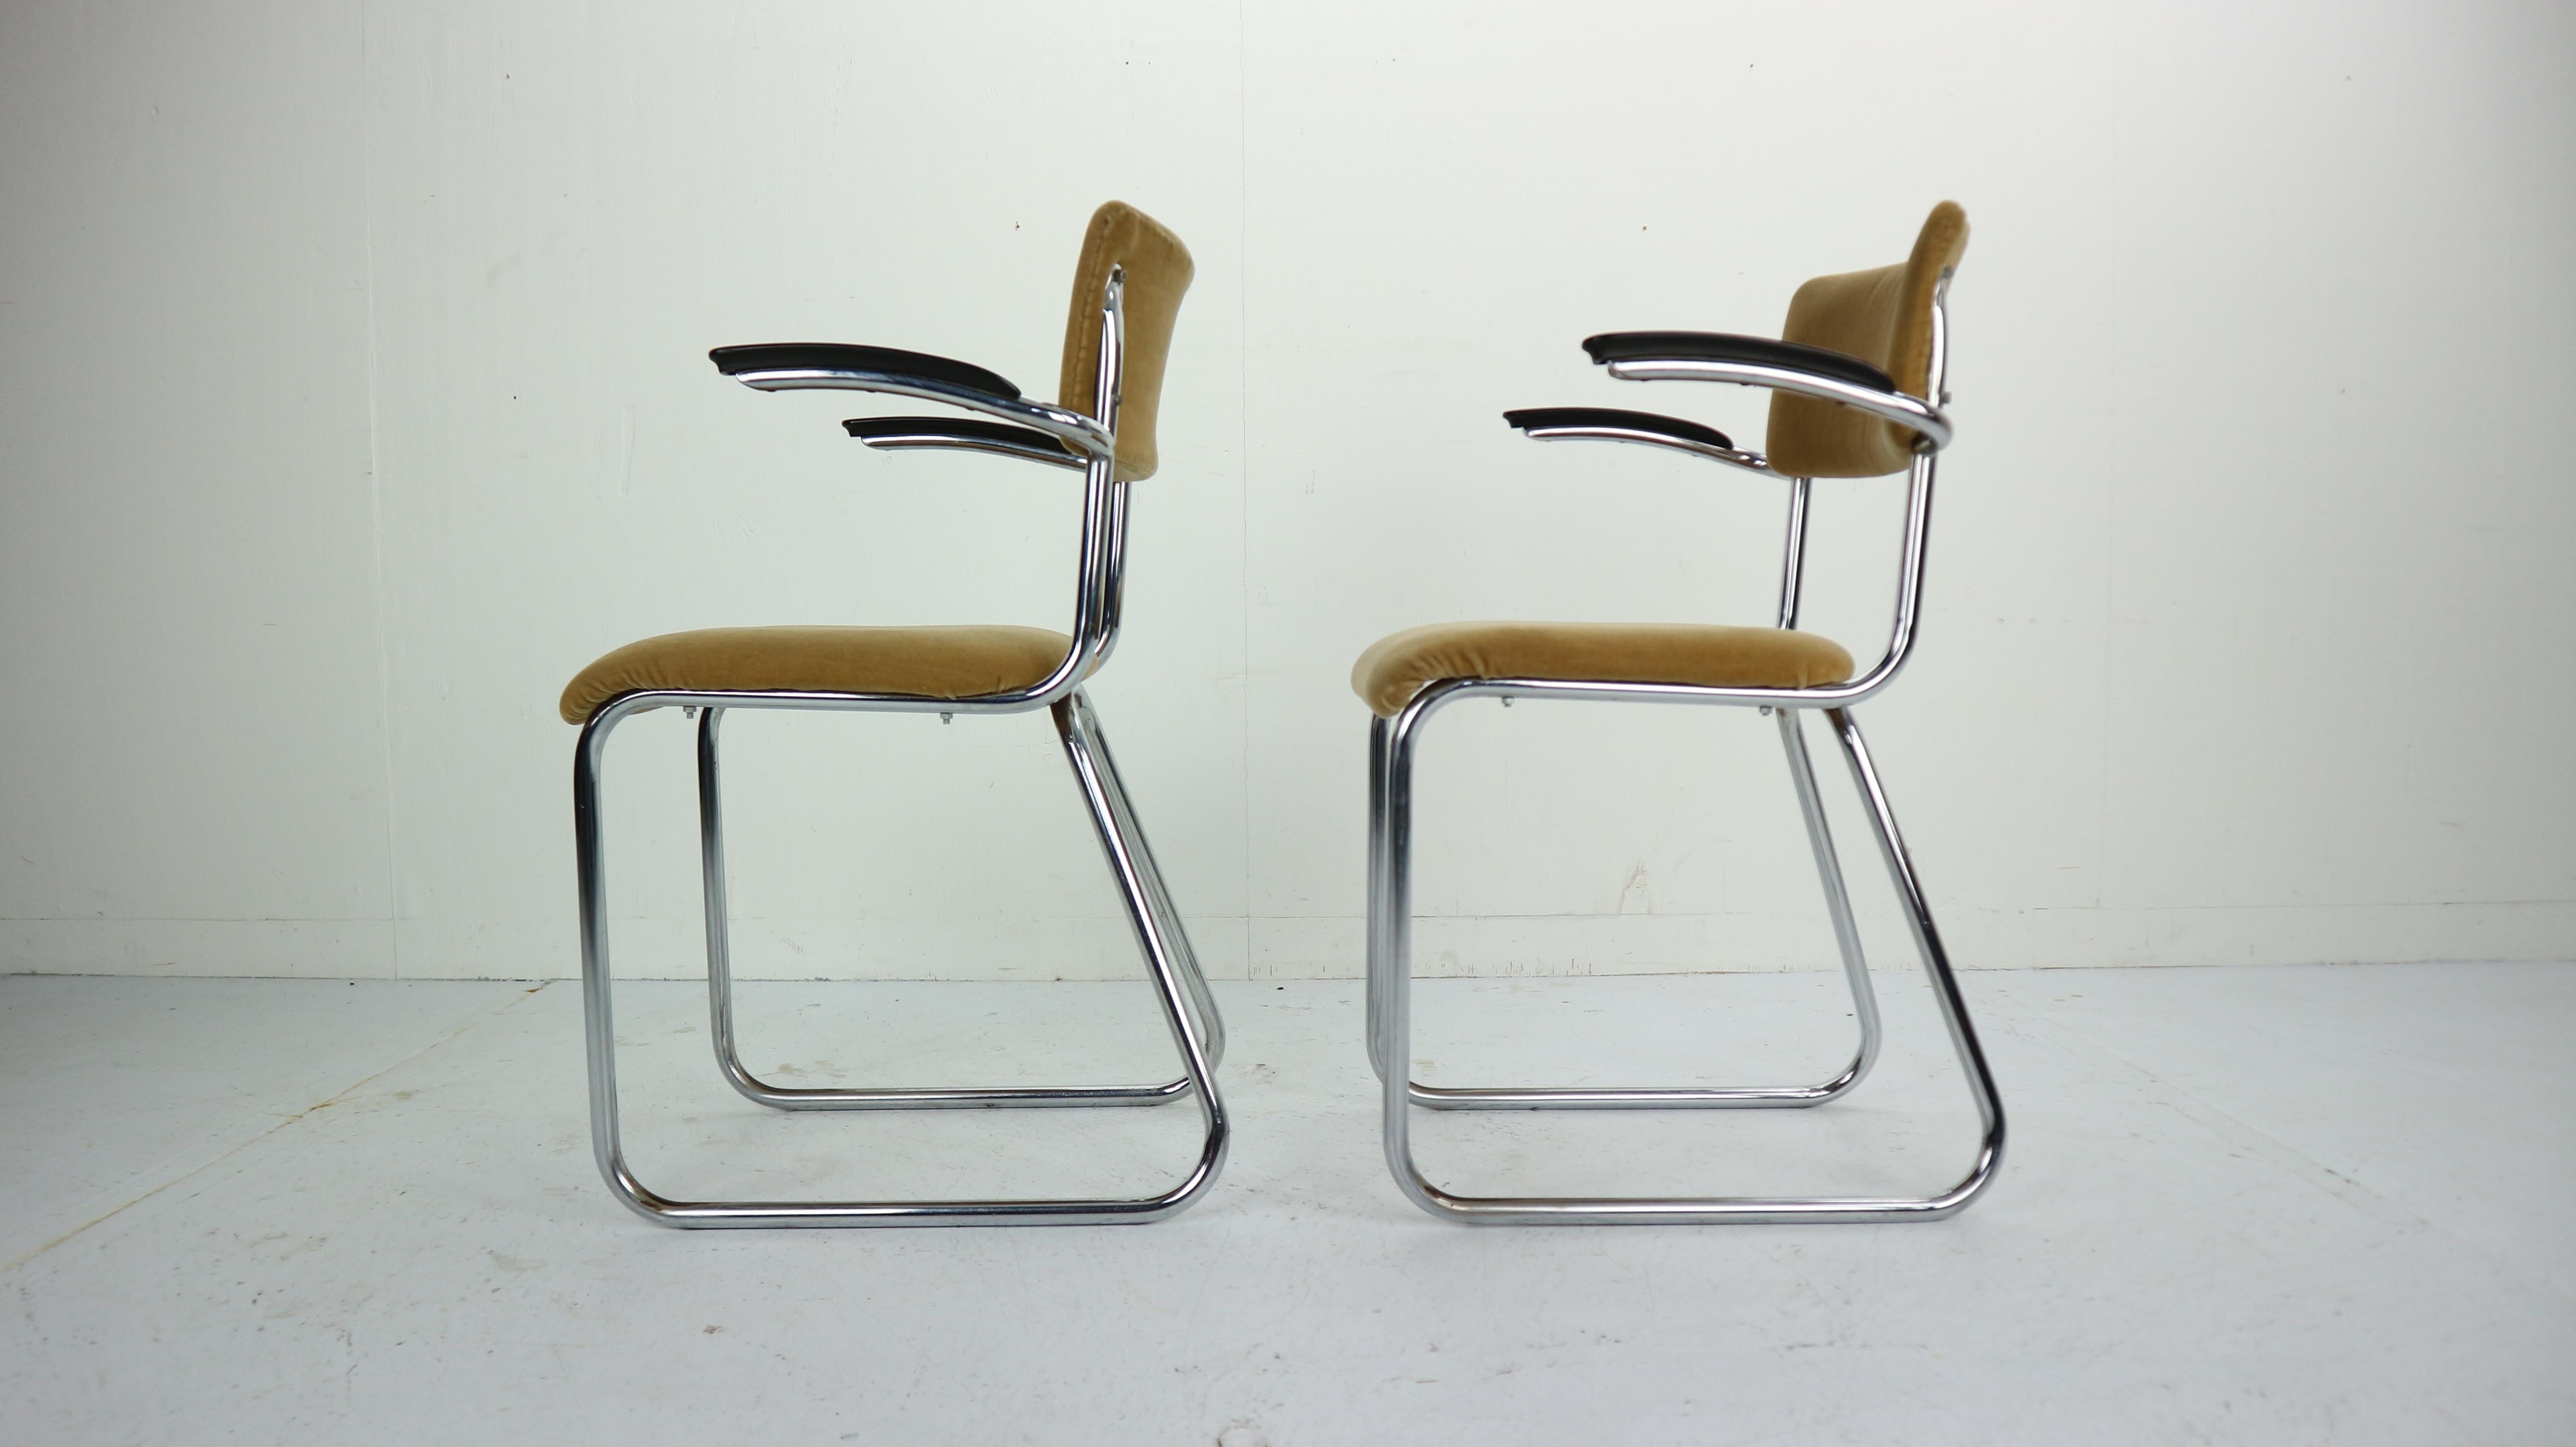 Fabric Set of 2 Industrial Armchairs in a Style of Gispen, 1960 Dutch Design